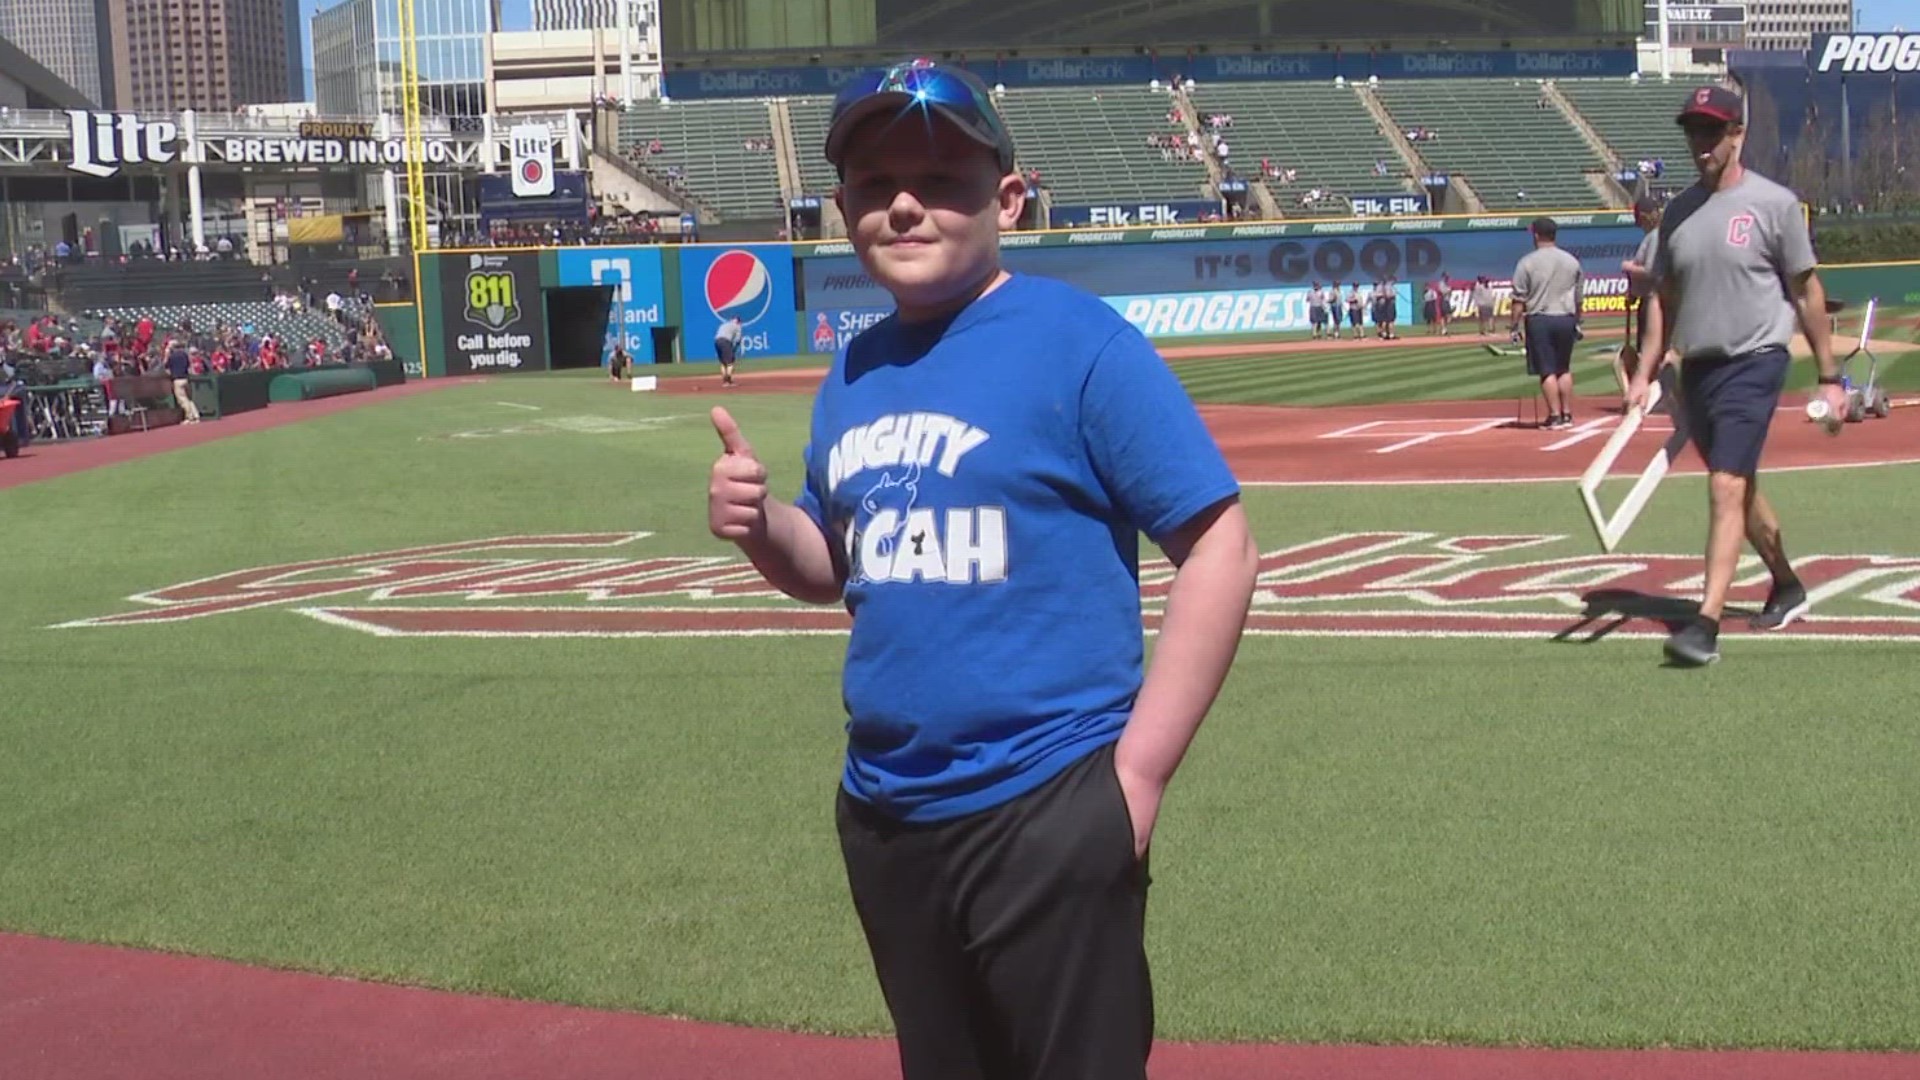 The Guards surprised Micah Galuzny with the honor before their showdown with the Yankees, and the travel baseball pitcher fired a perfect strike.